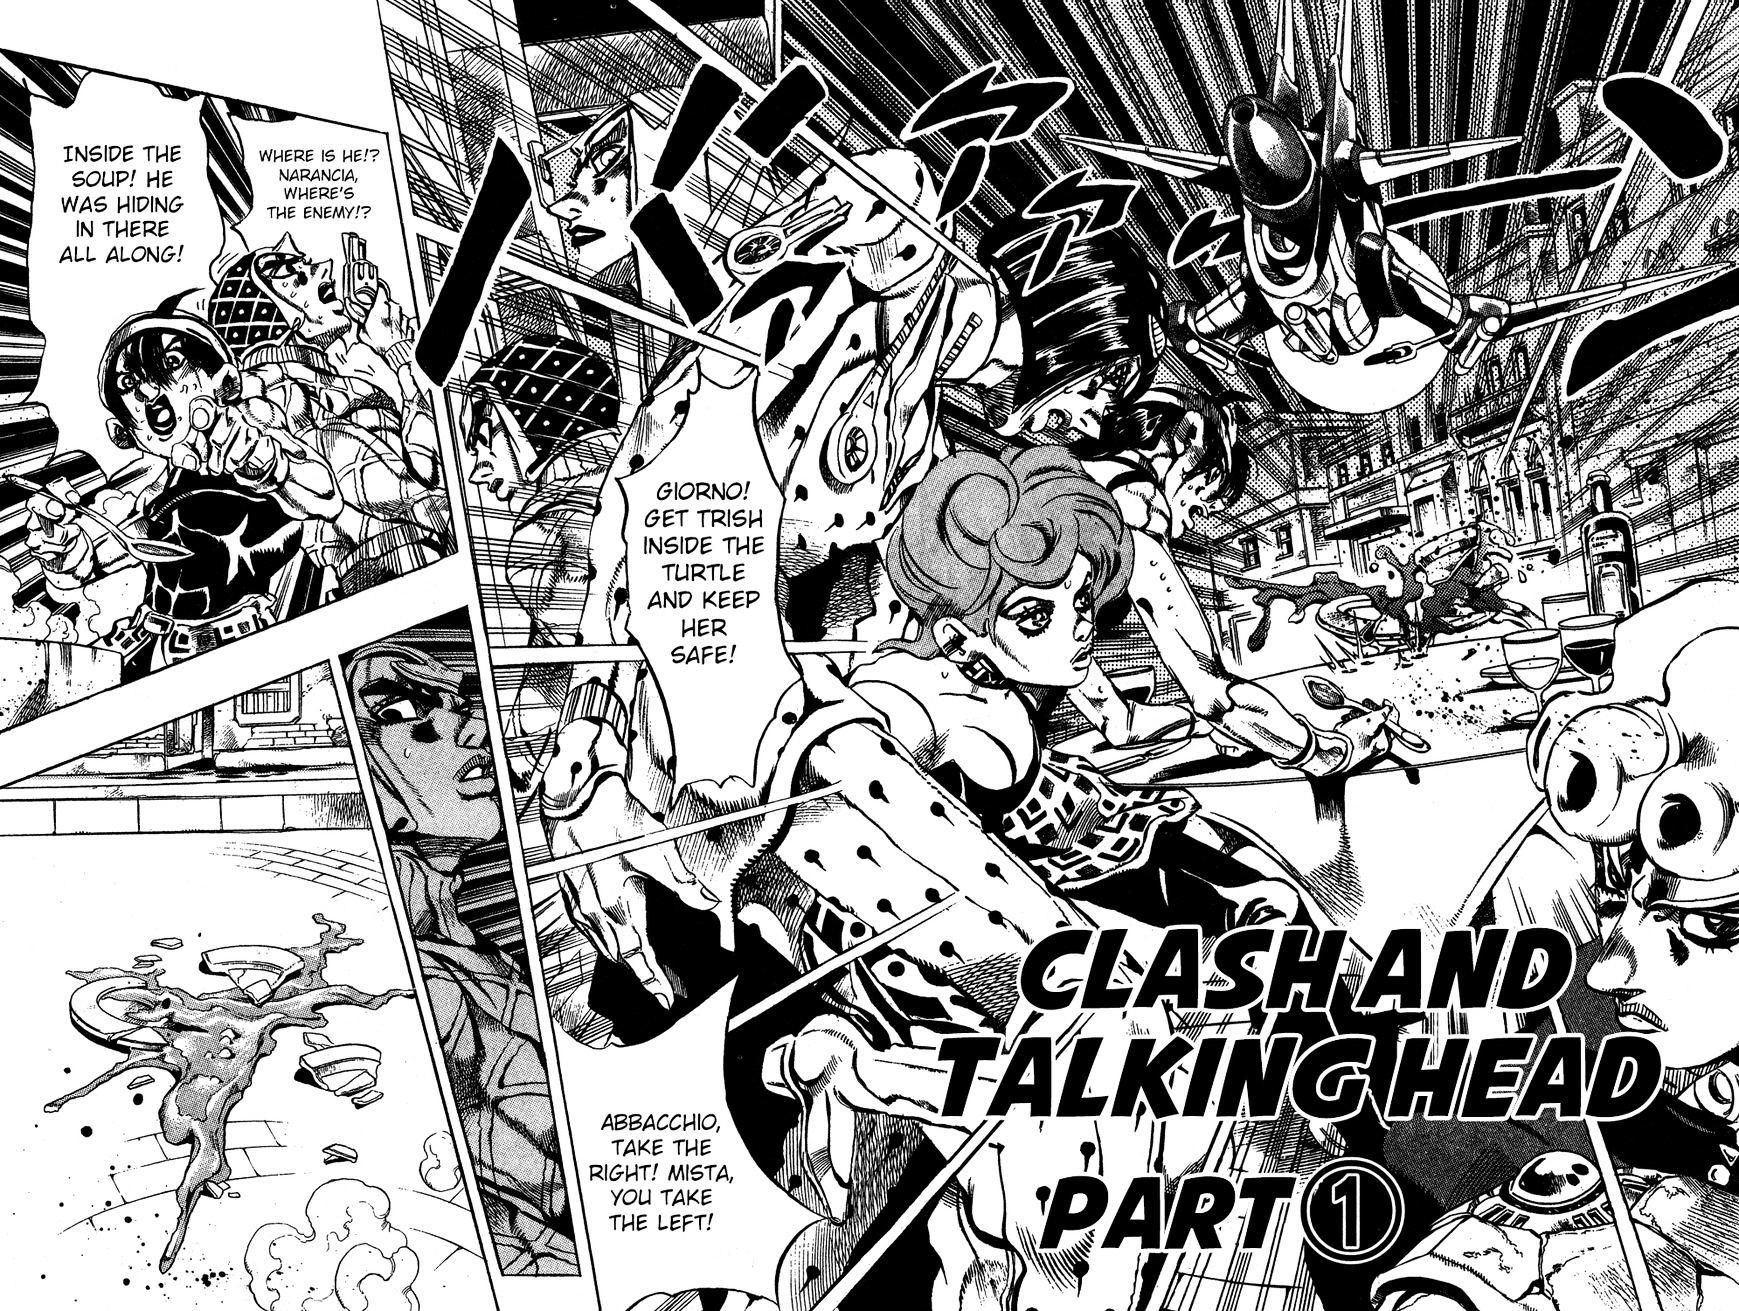 Jojo's Bizarre Adventure Vol.56 Chapter 525 : Clash And Taking Head - Part 1 page 3 - 